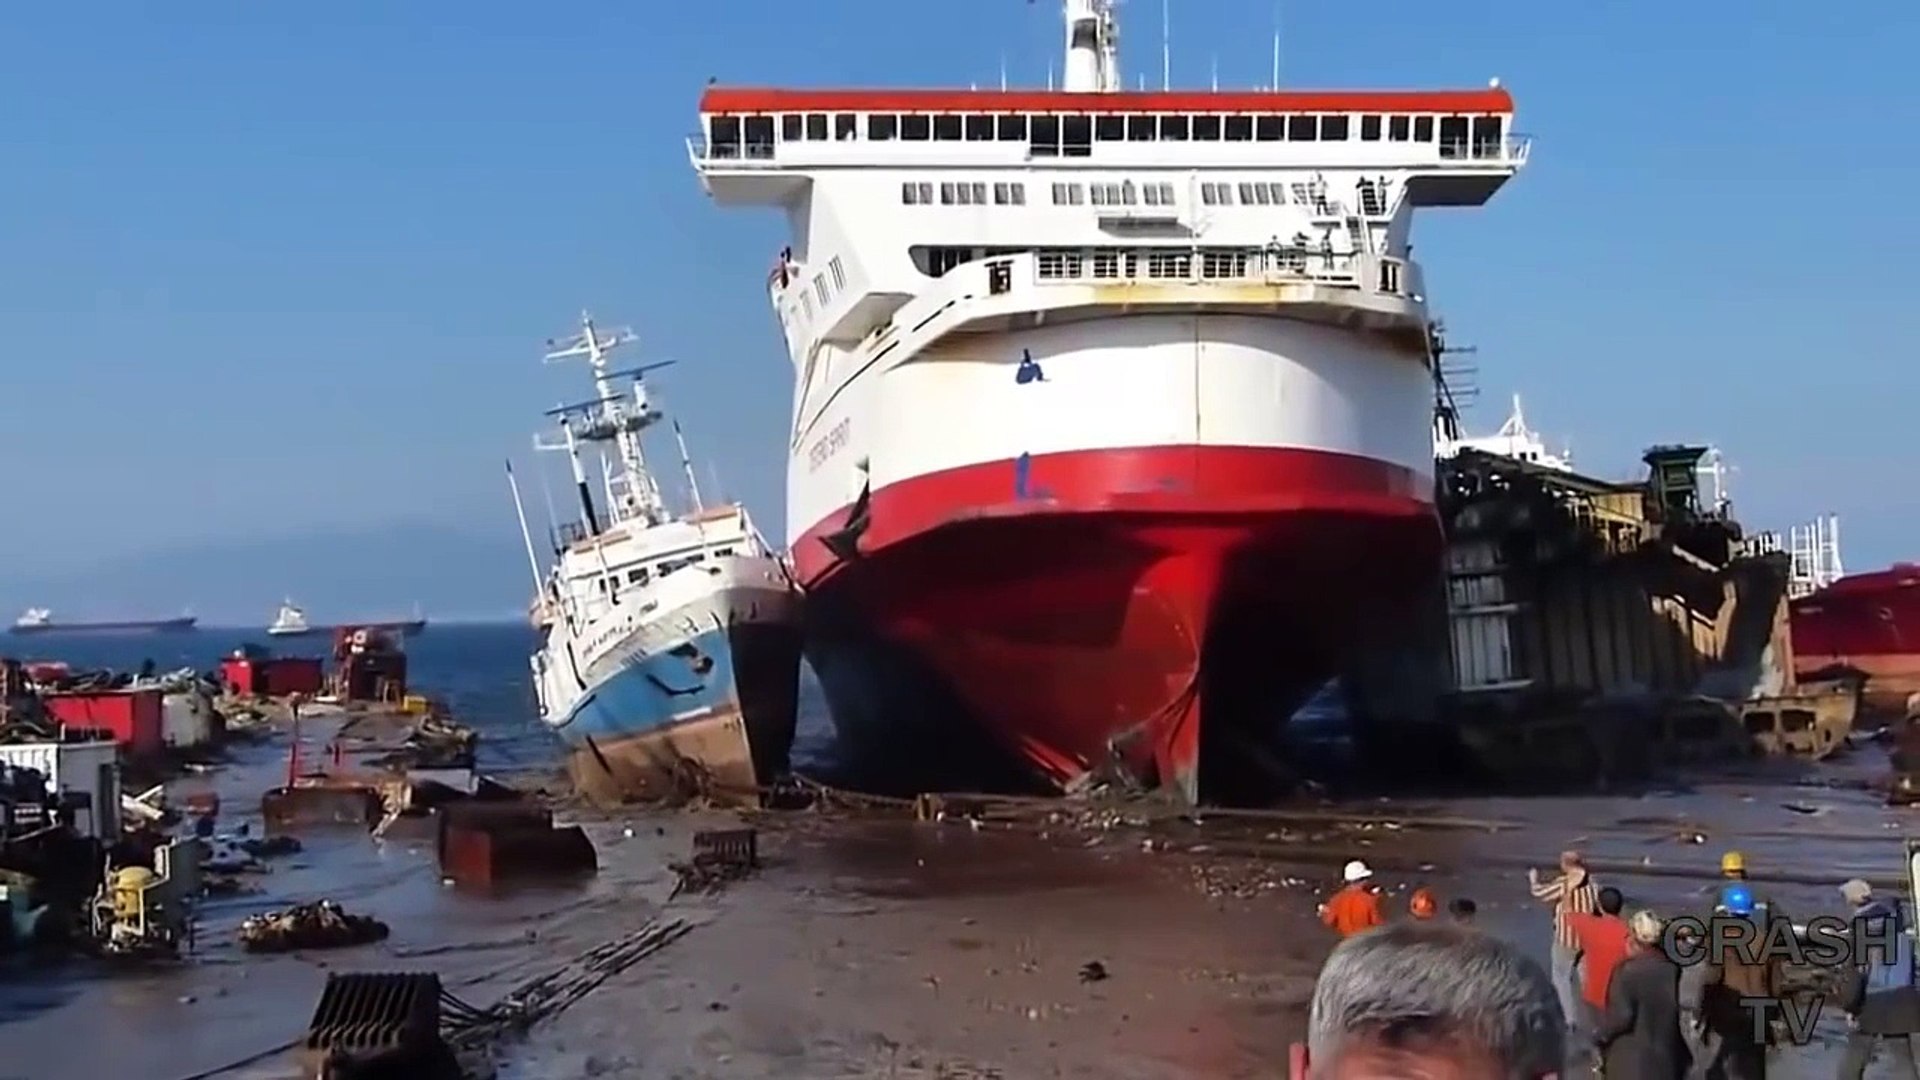 12 Most Amazing and Incredible Ships Accidents